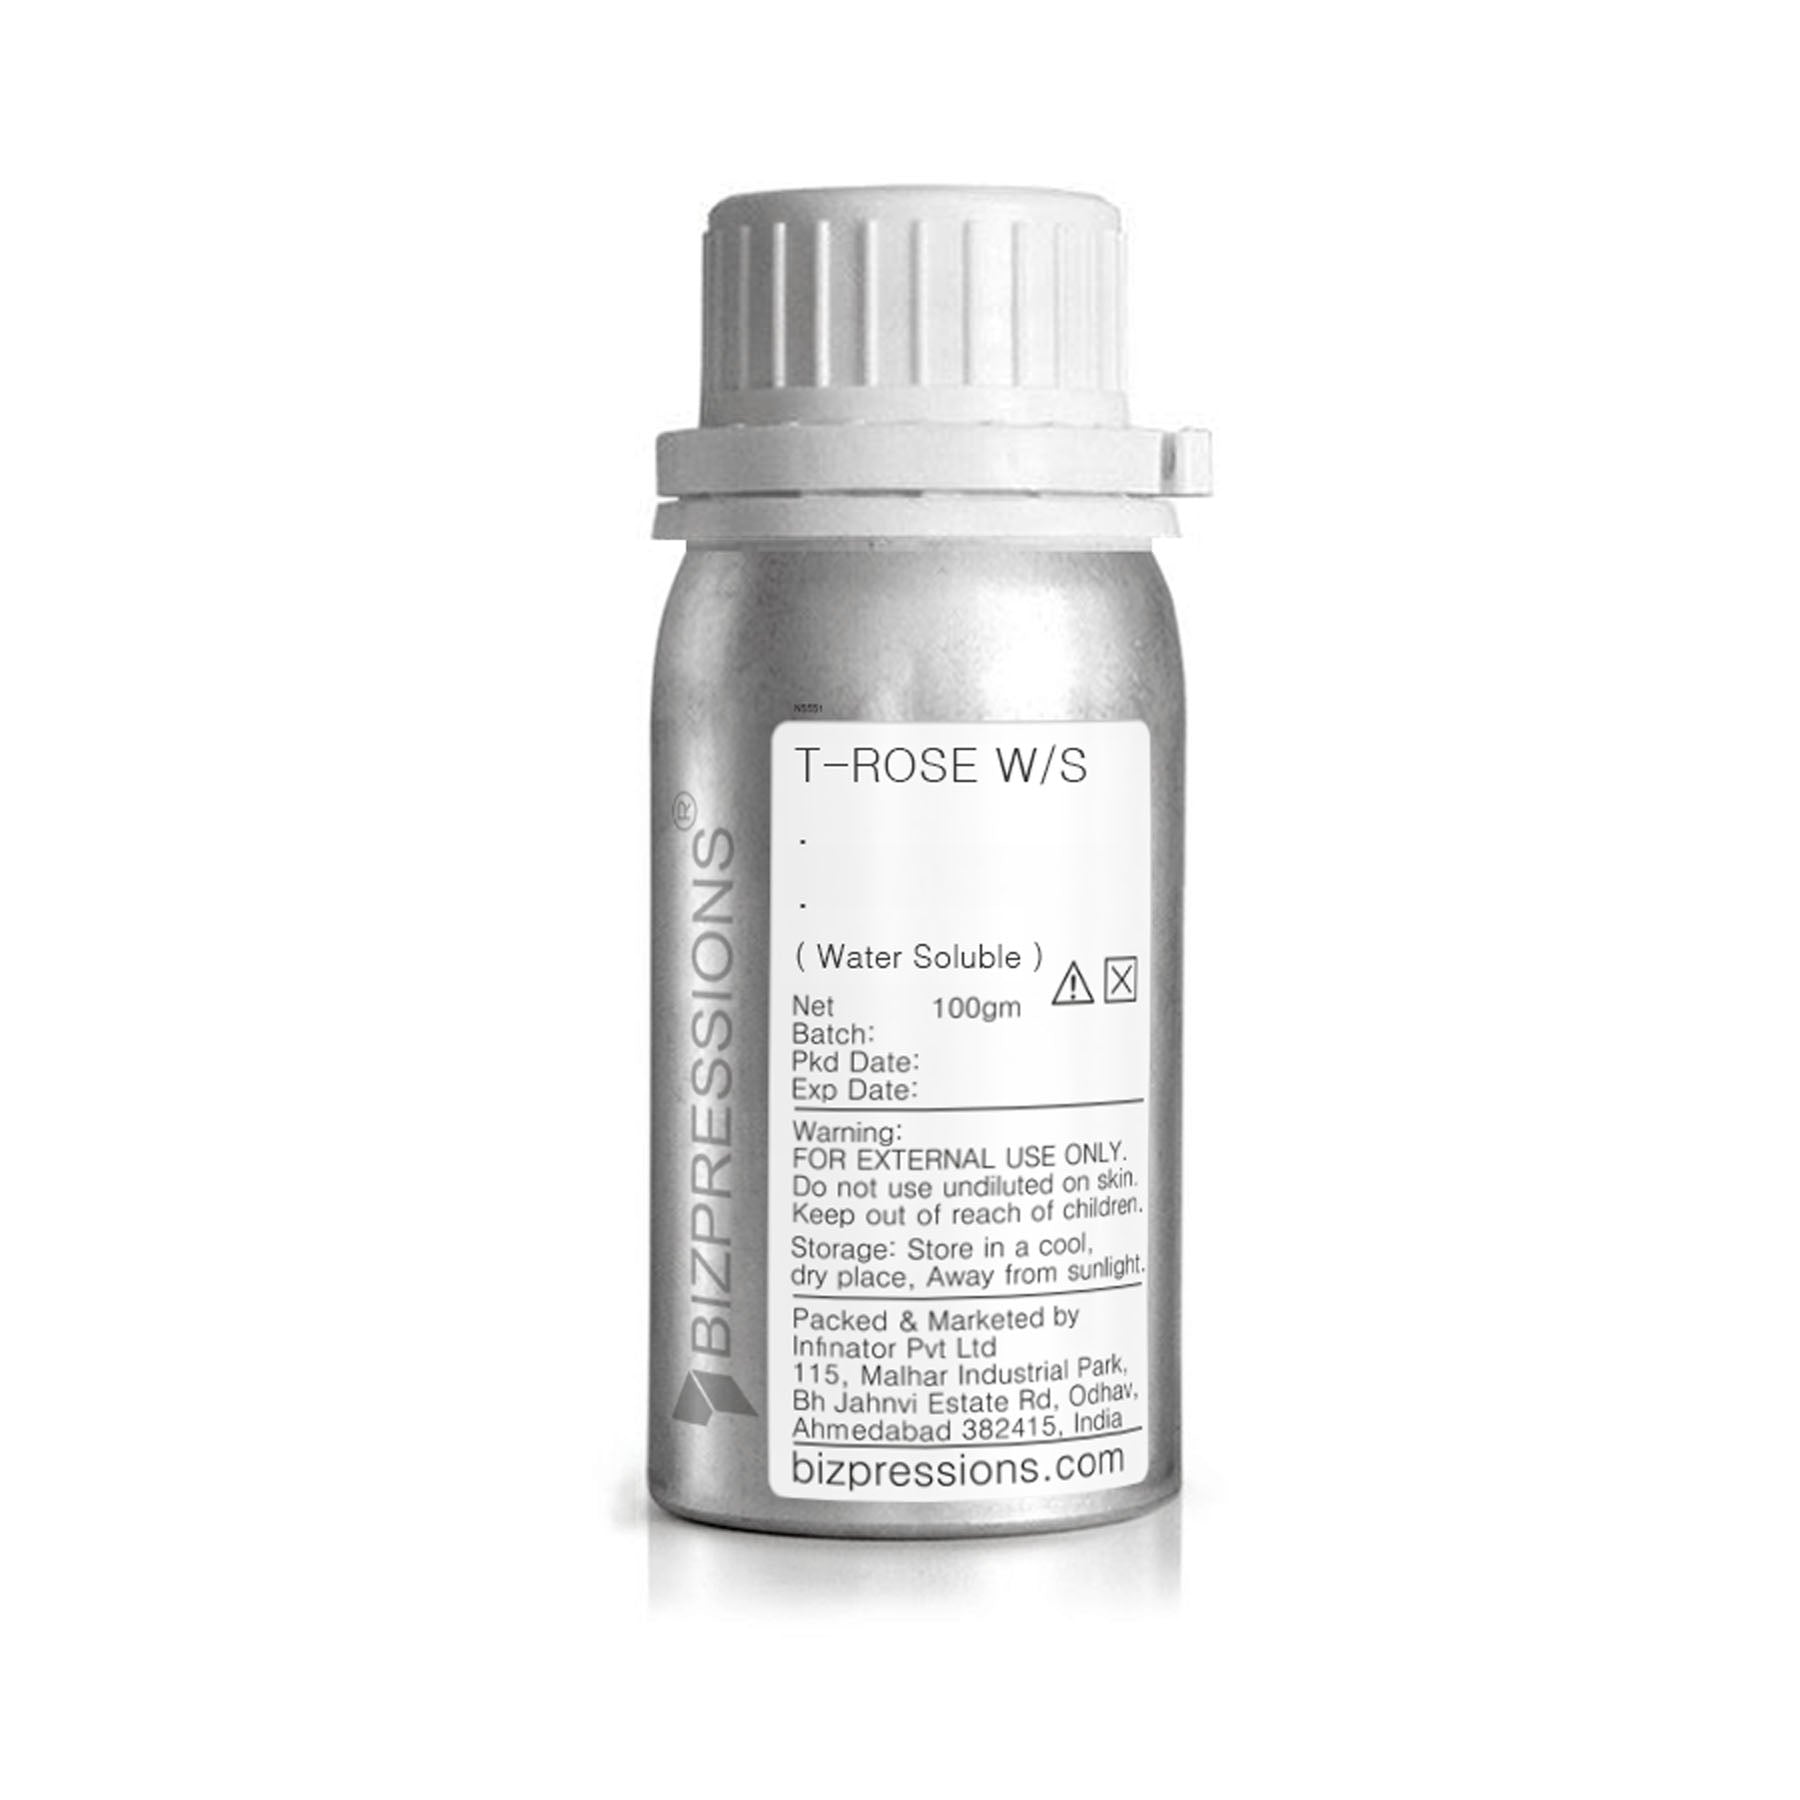 T-ROSE W/S - Fragrance ( Water Soluble ) - 100 gm